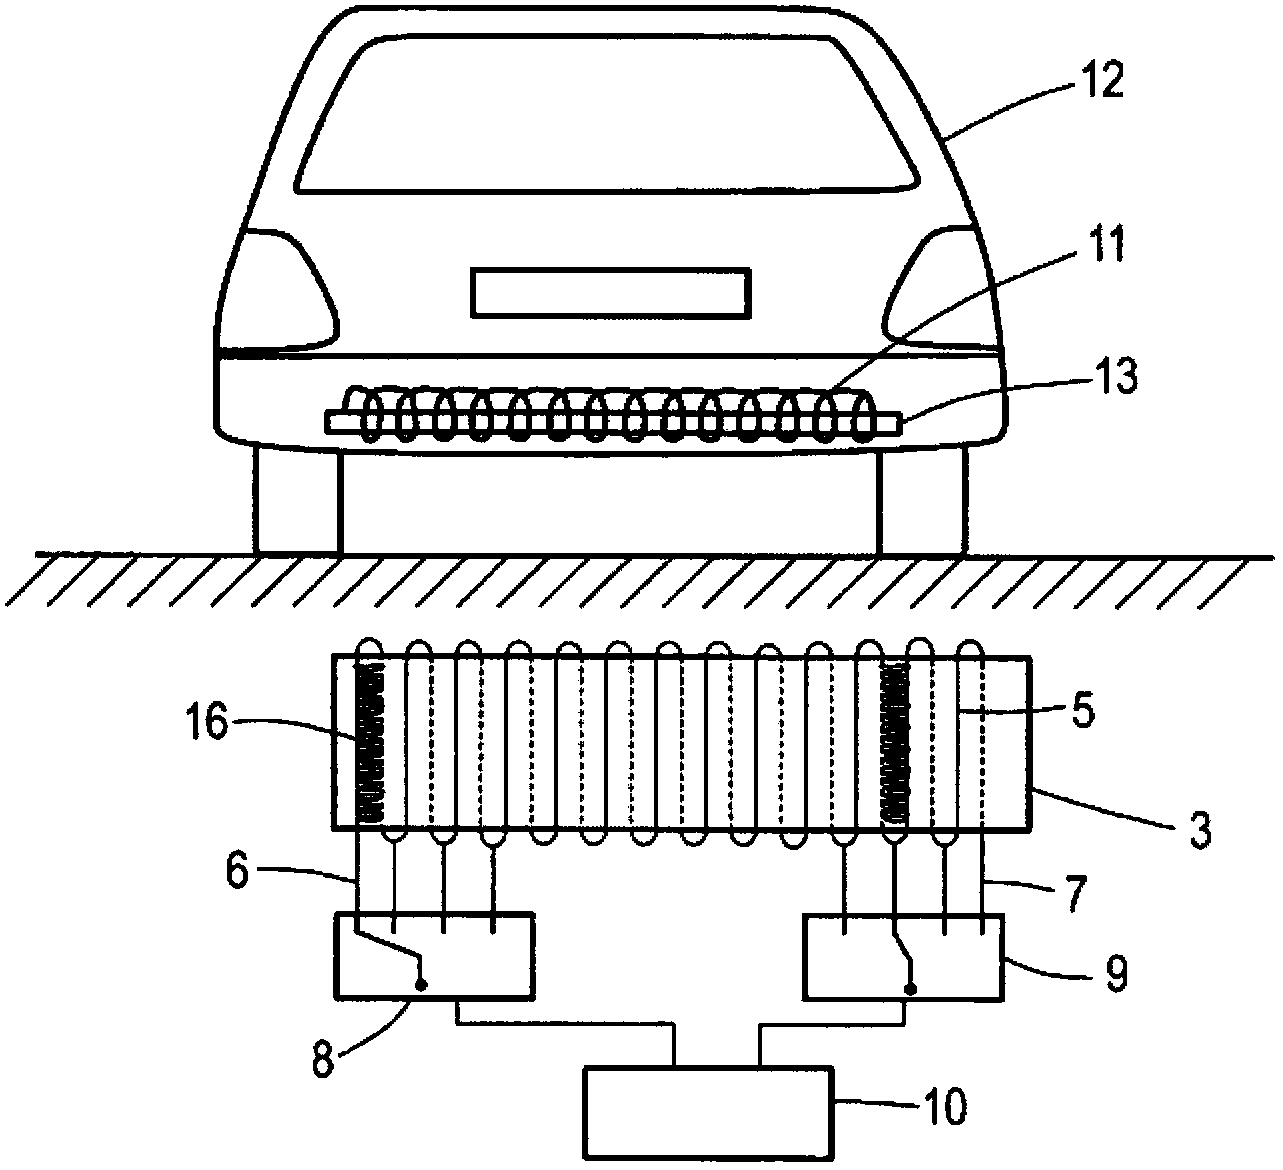 Device for the inductive transmission of electric energy